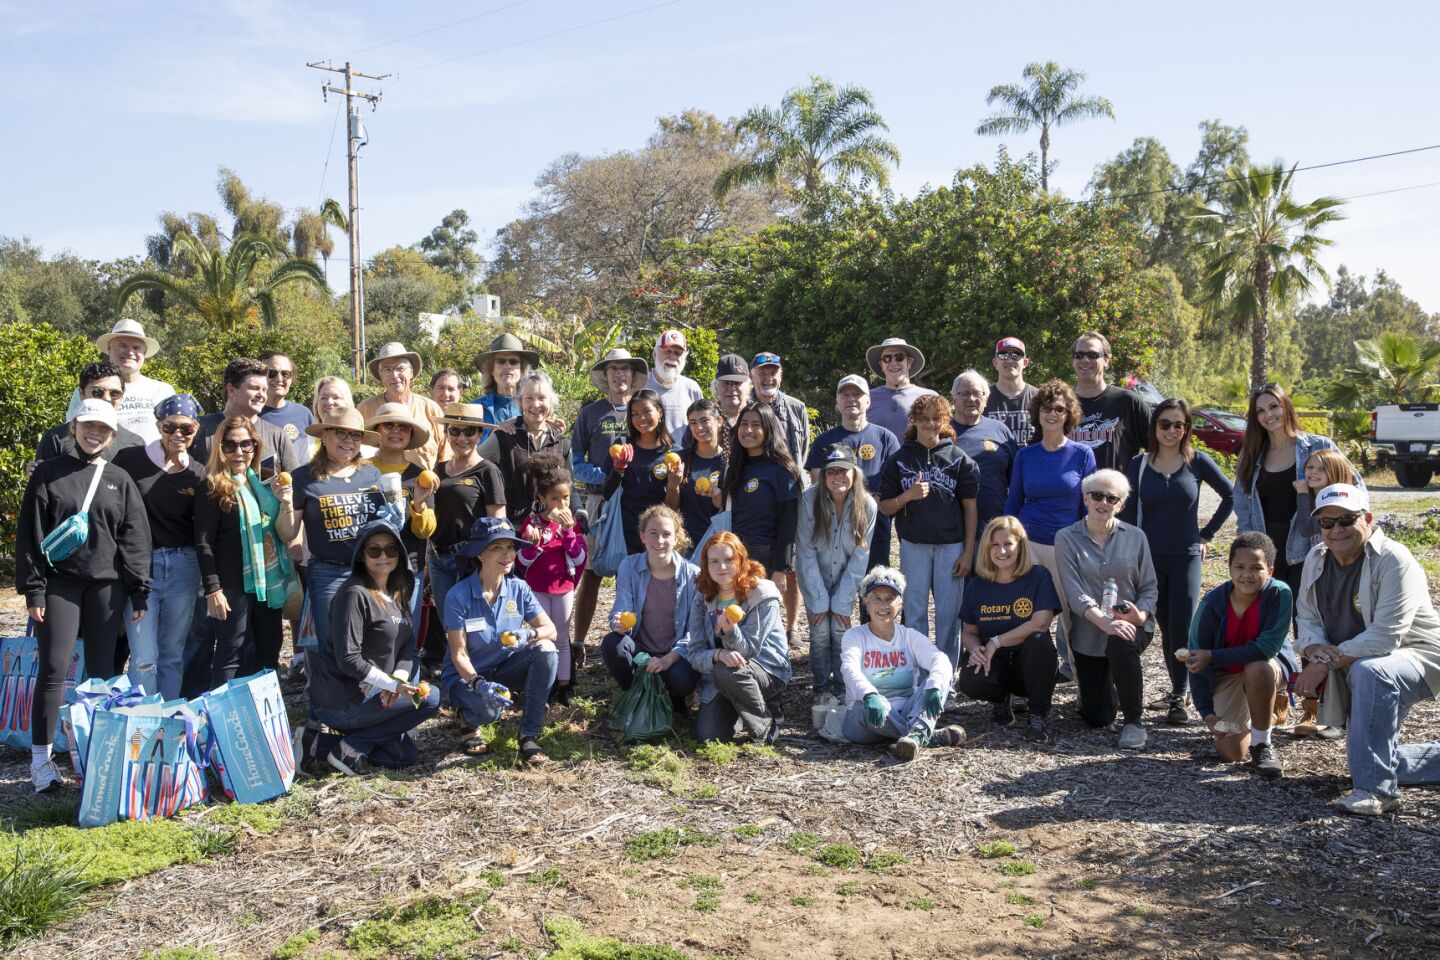 Rotary Club members from Encinitas, Del Mar, and Solana Beach recently gathered to pick oranges at a Rancho Santa Fe estate and donated them to the Community Resource Center in Encinitas.